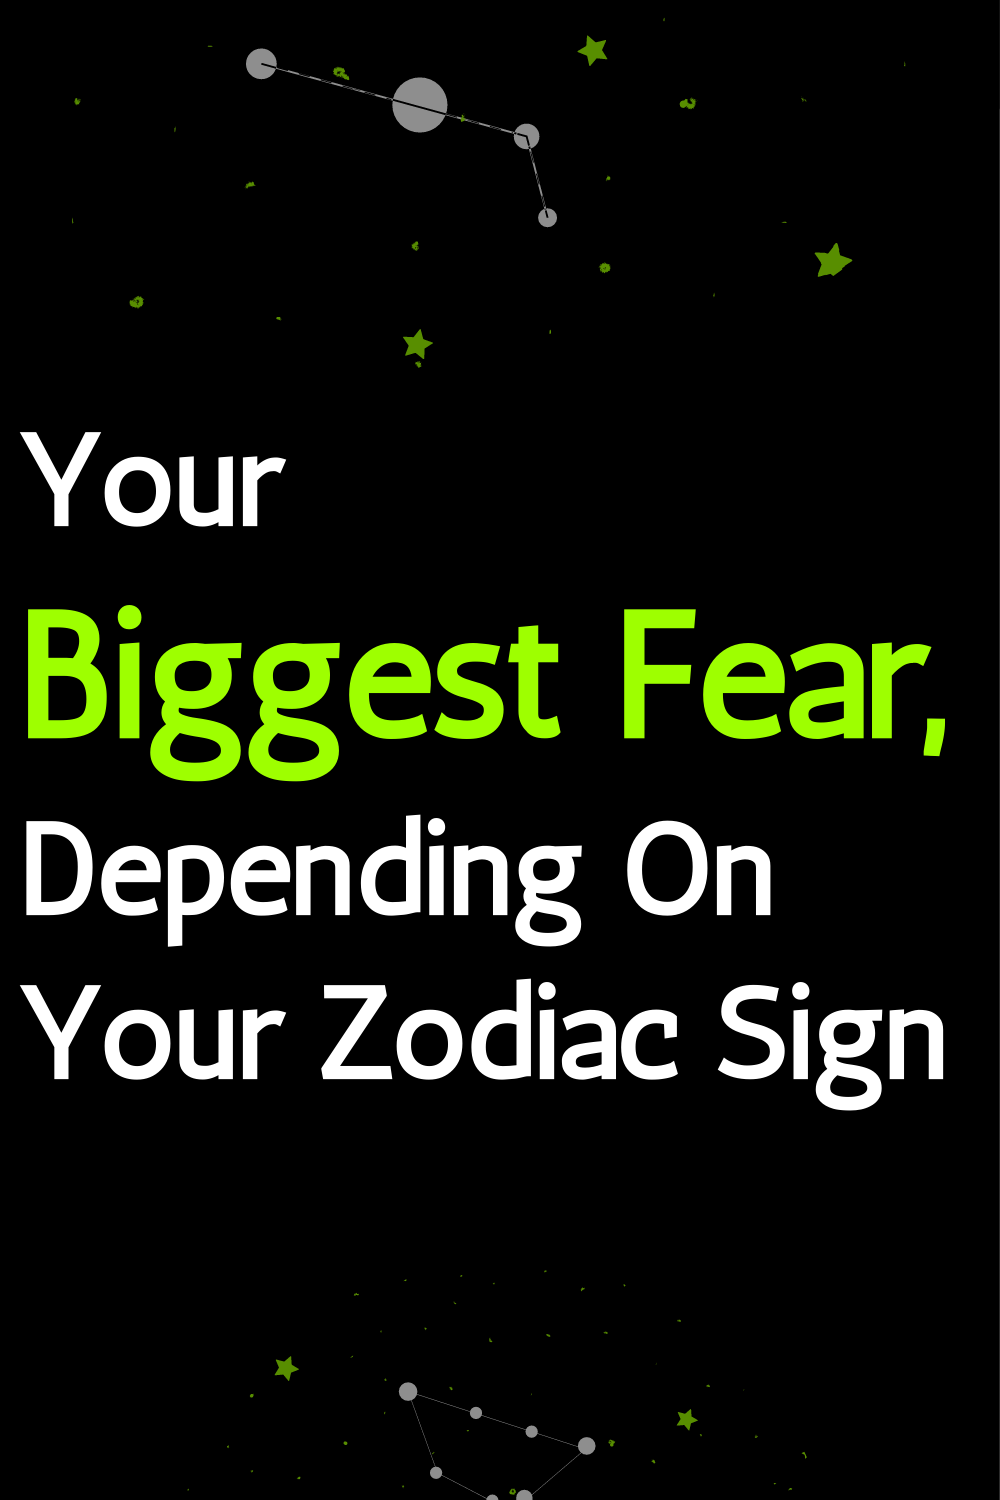 Your Biggest Fear, Depending On Your Zodiac Sign